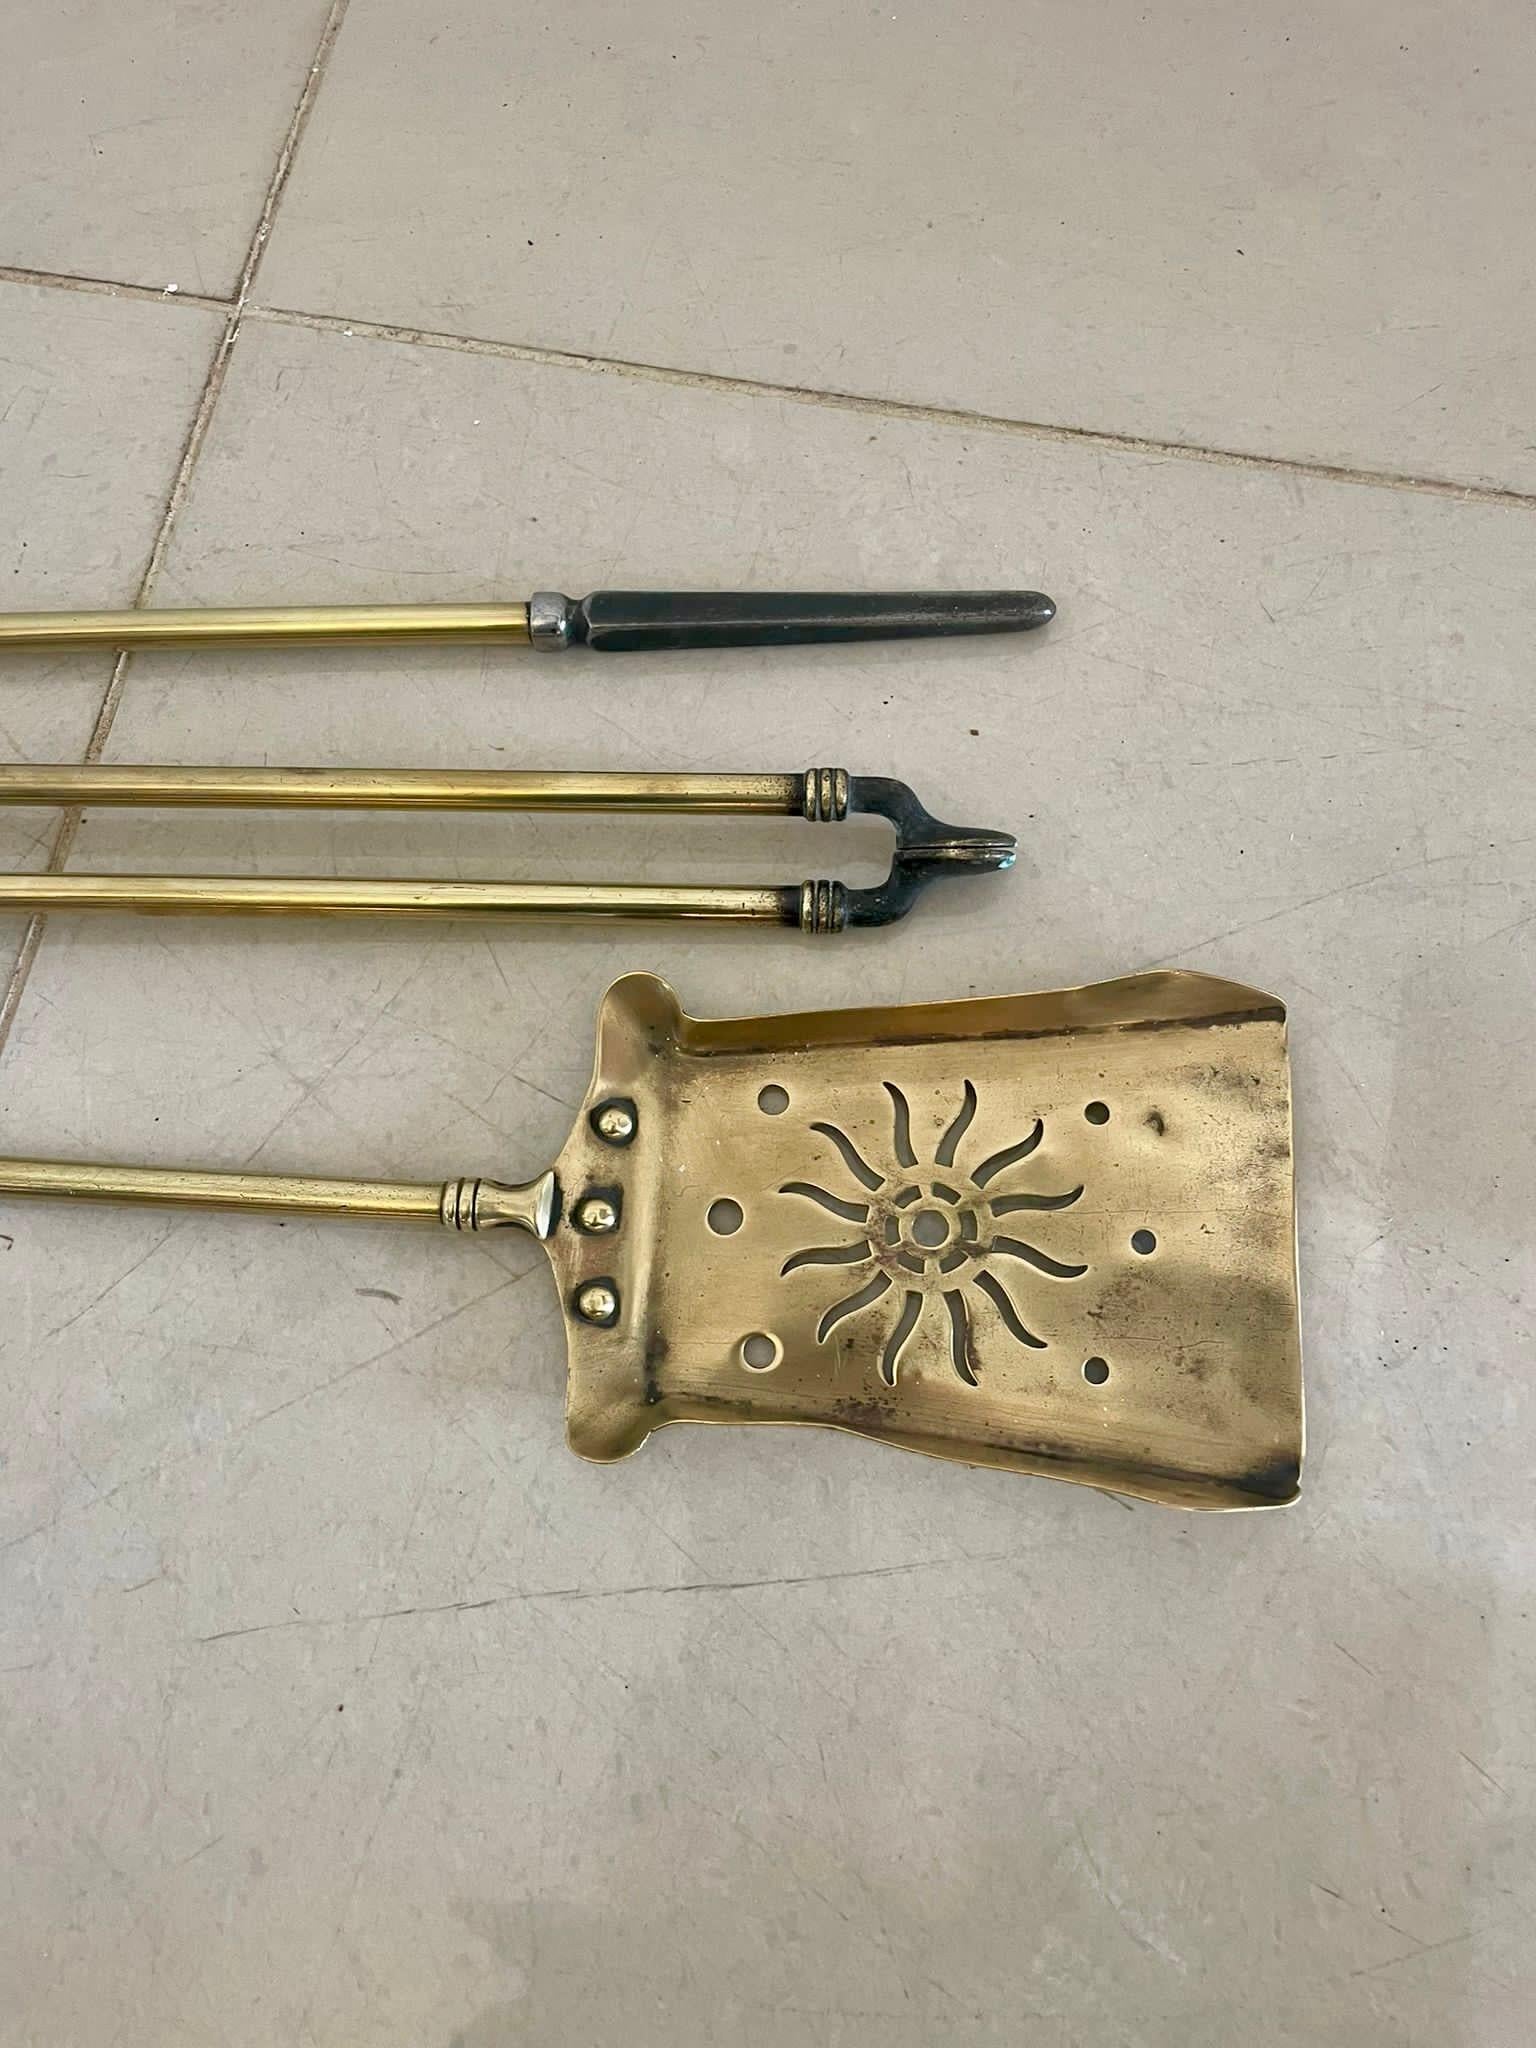 Three antique Victorian quality brass fire irons consisting of a quality brass shovel depicting a starburst, poker, and fire tongs


Dimensions:
Height 69 cm 
Width 14 cm 
Depth 3 cm


Dated 1860
